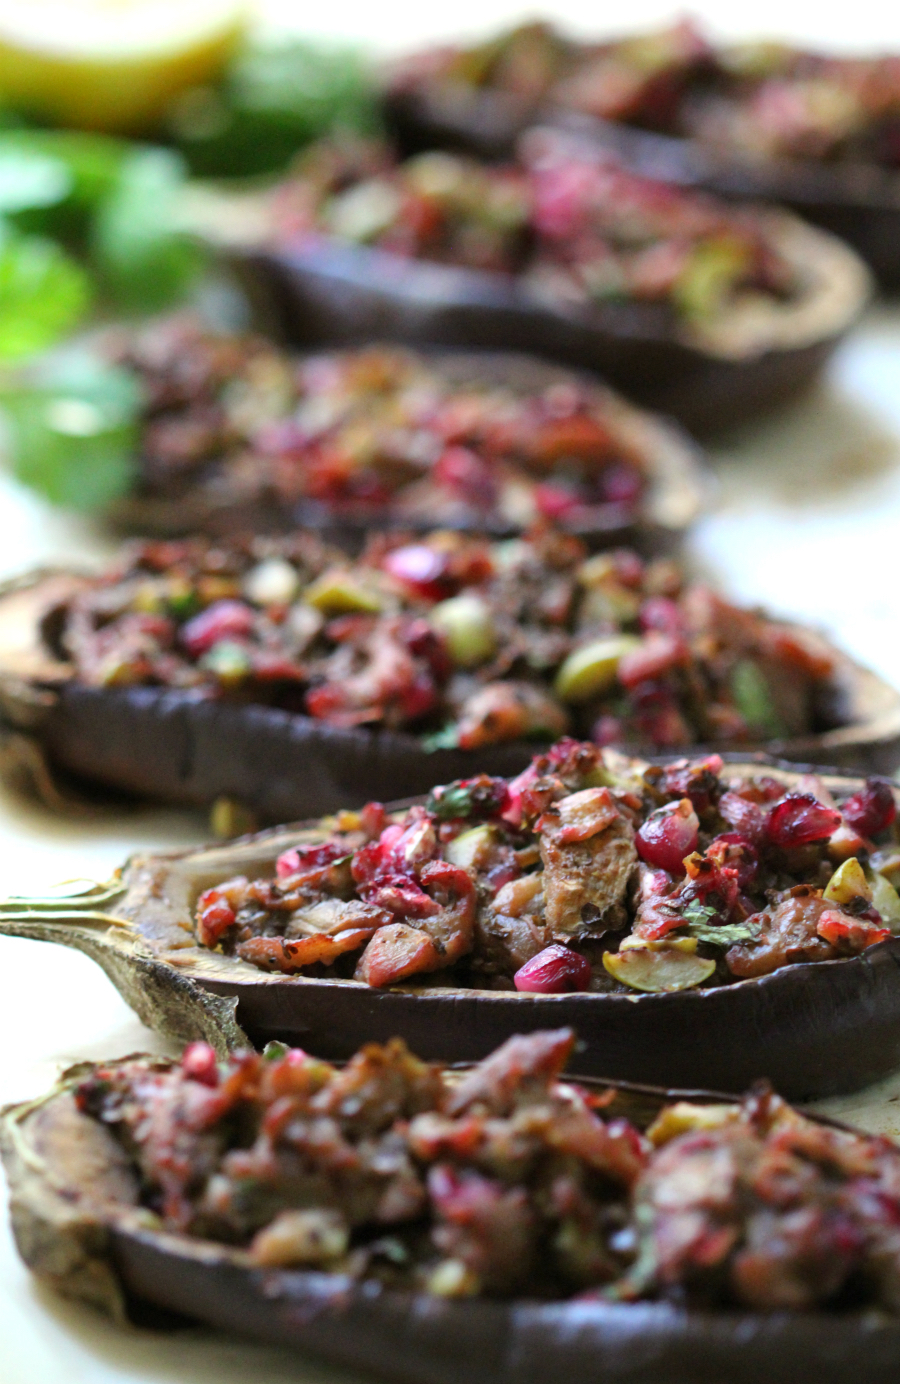 Middle Eastern Twice-Baked Baby Eggplants | Strength and Sunshine @RebeccaGF666 Flavorful Middle Eastern Twice-Baked Baby Eggplants make a delicious gluten-free, vegan, paleo, and allergy-free appetizer or side dish. An easy plant-based recipe that will wow the tastebuds with new exciting flavors!